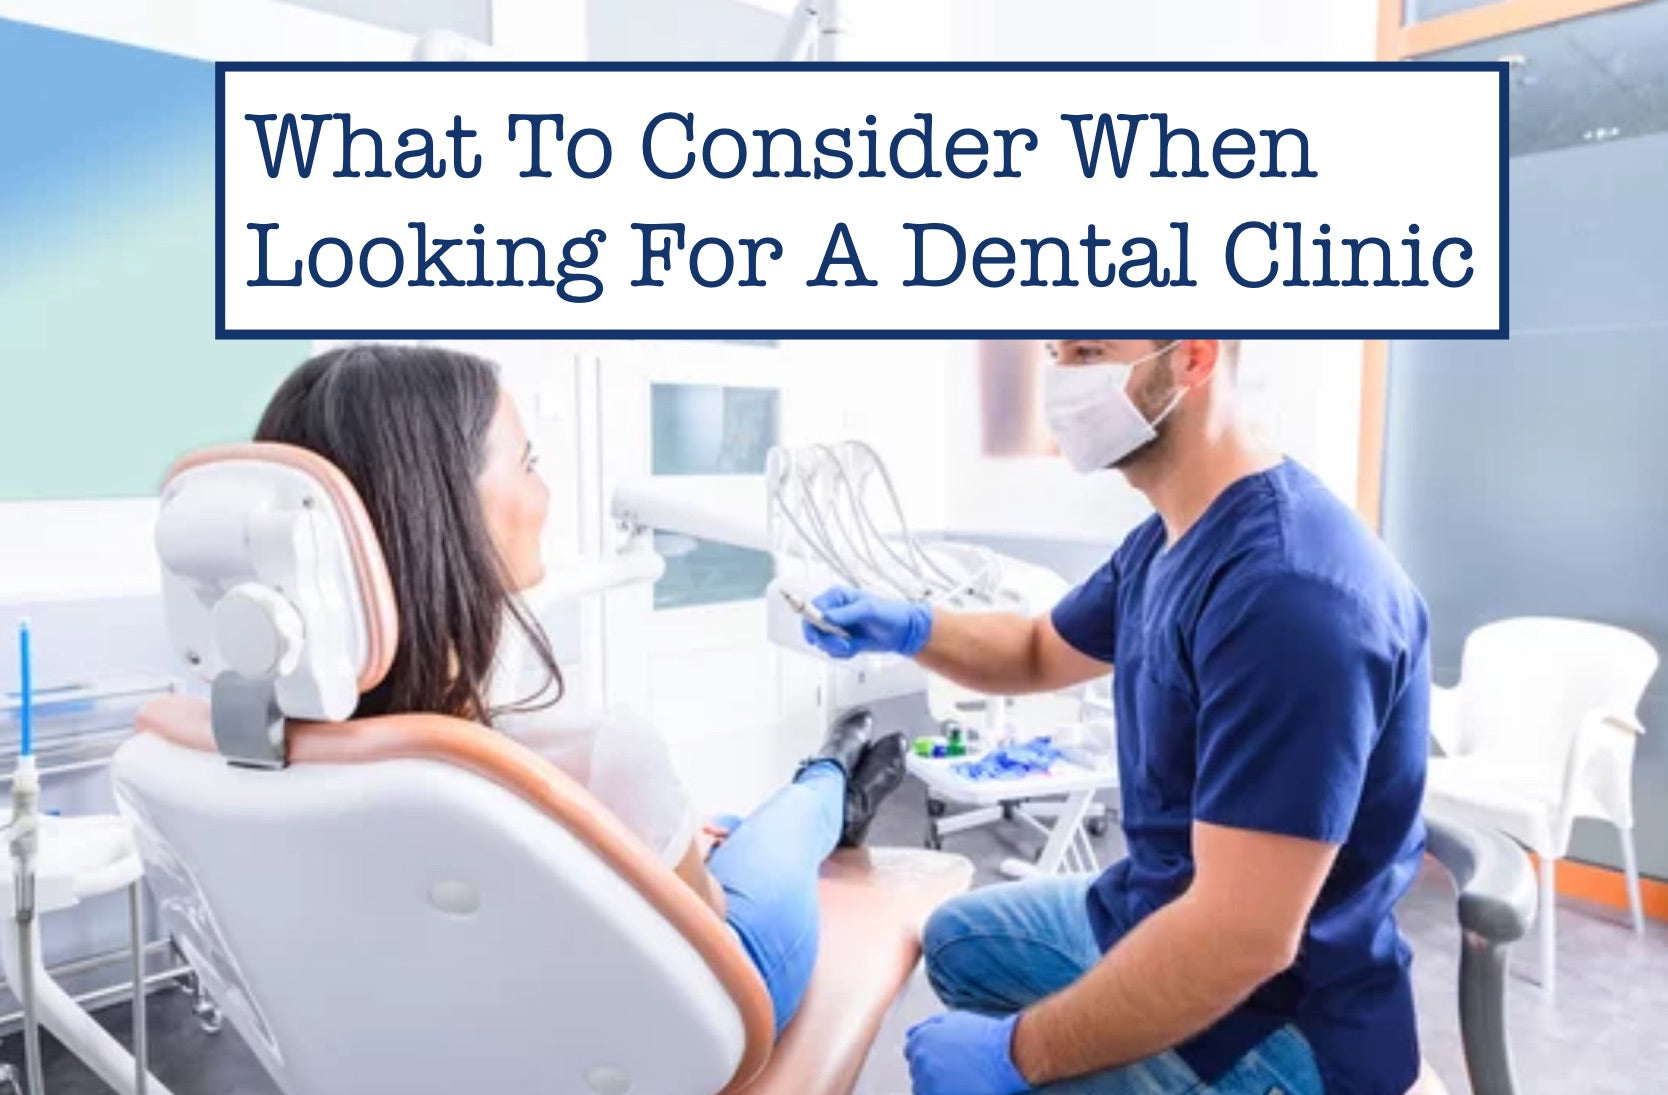 What To Consider When Looking For A Dental Clinic